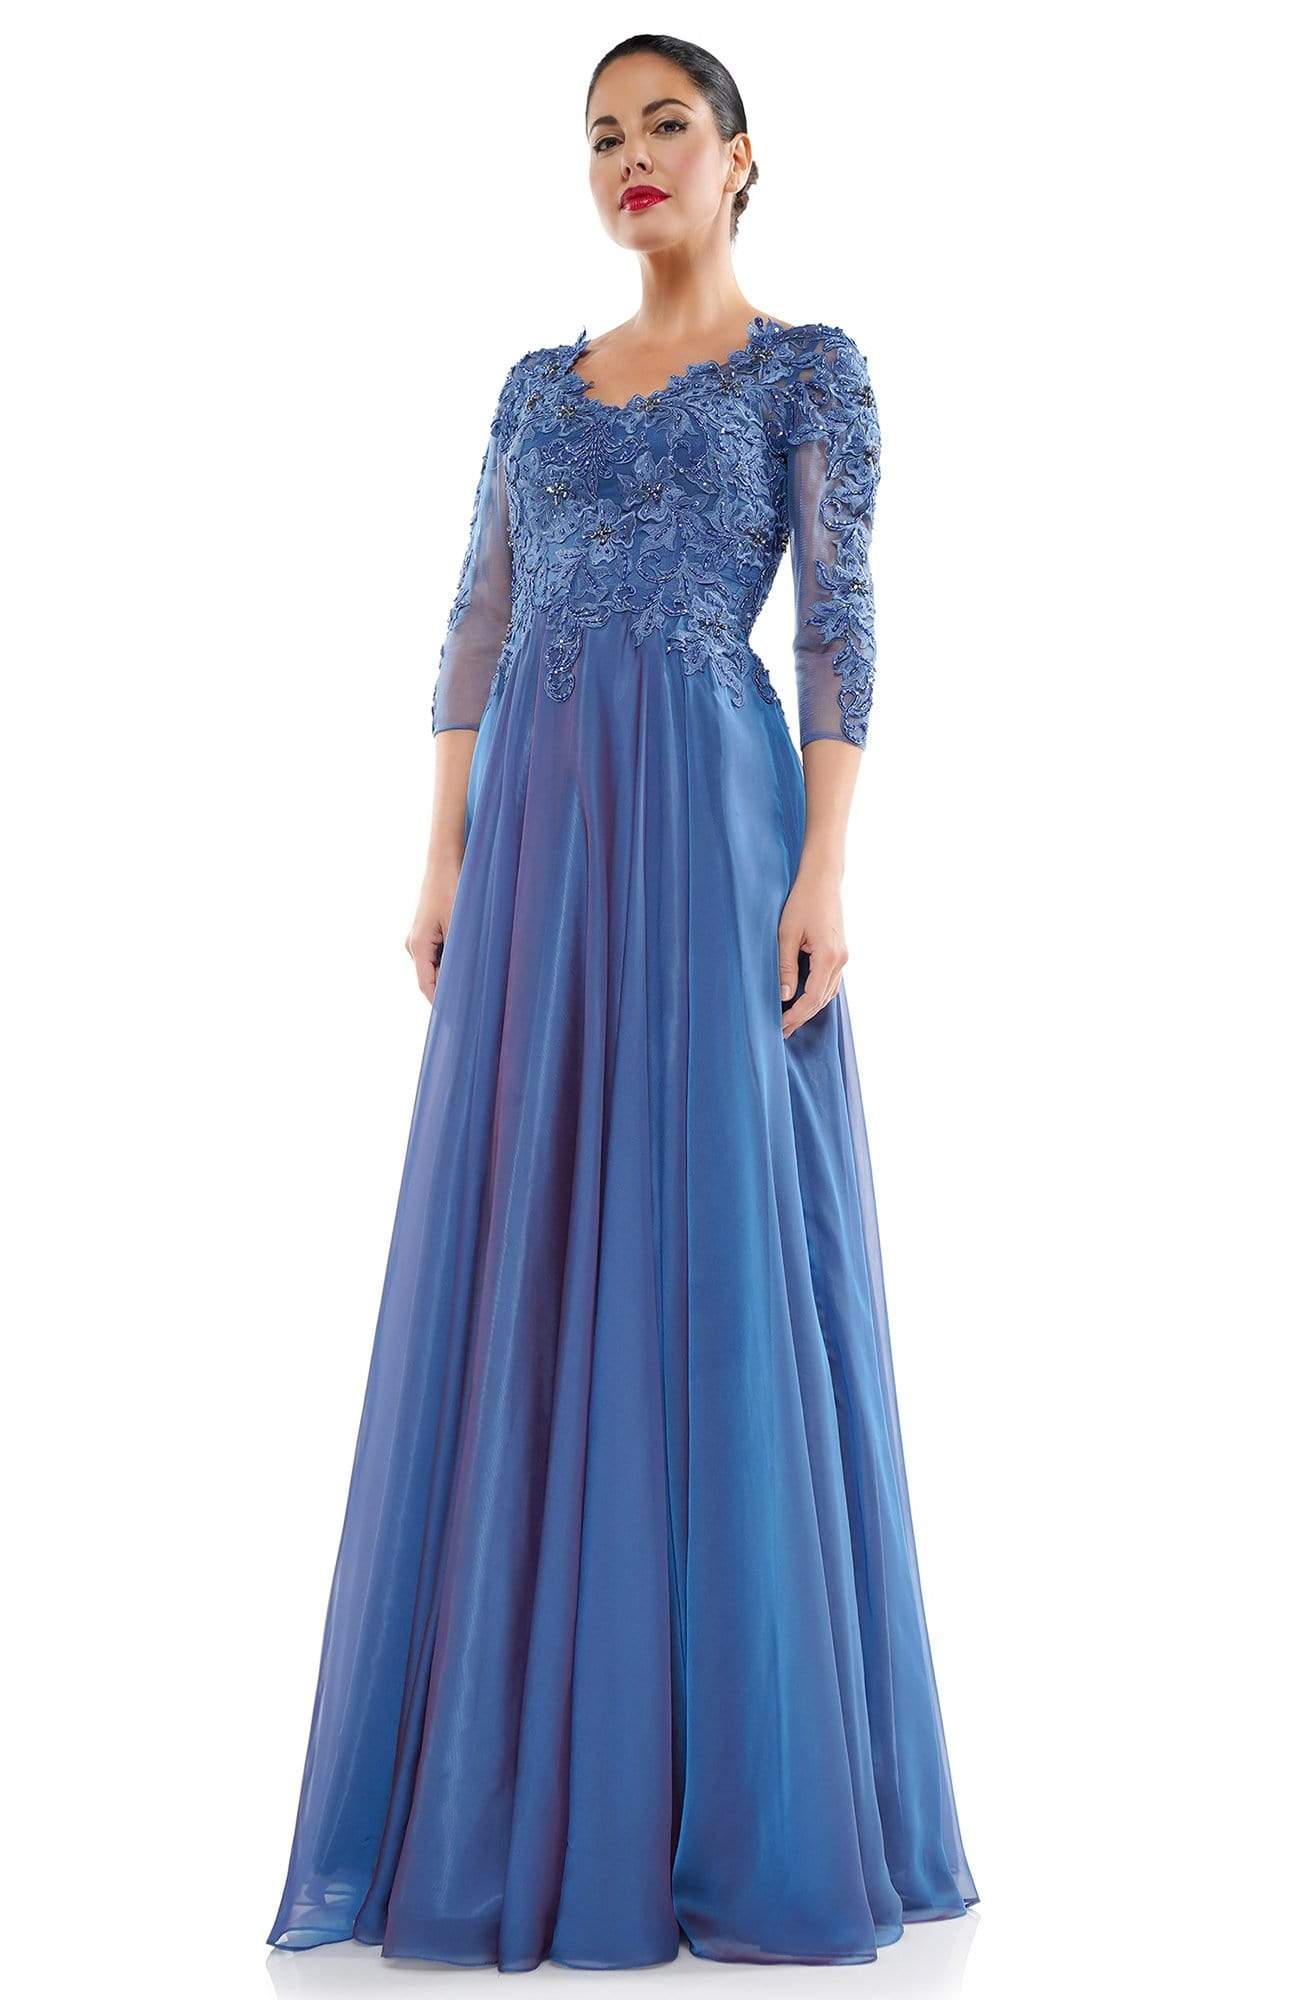 Marsoni by Colors - M281 Embroidered Scoop Neck Chiffon A-line Dress Mother of the Bride Dresses 6 / Slate Blue